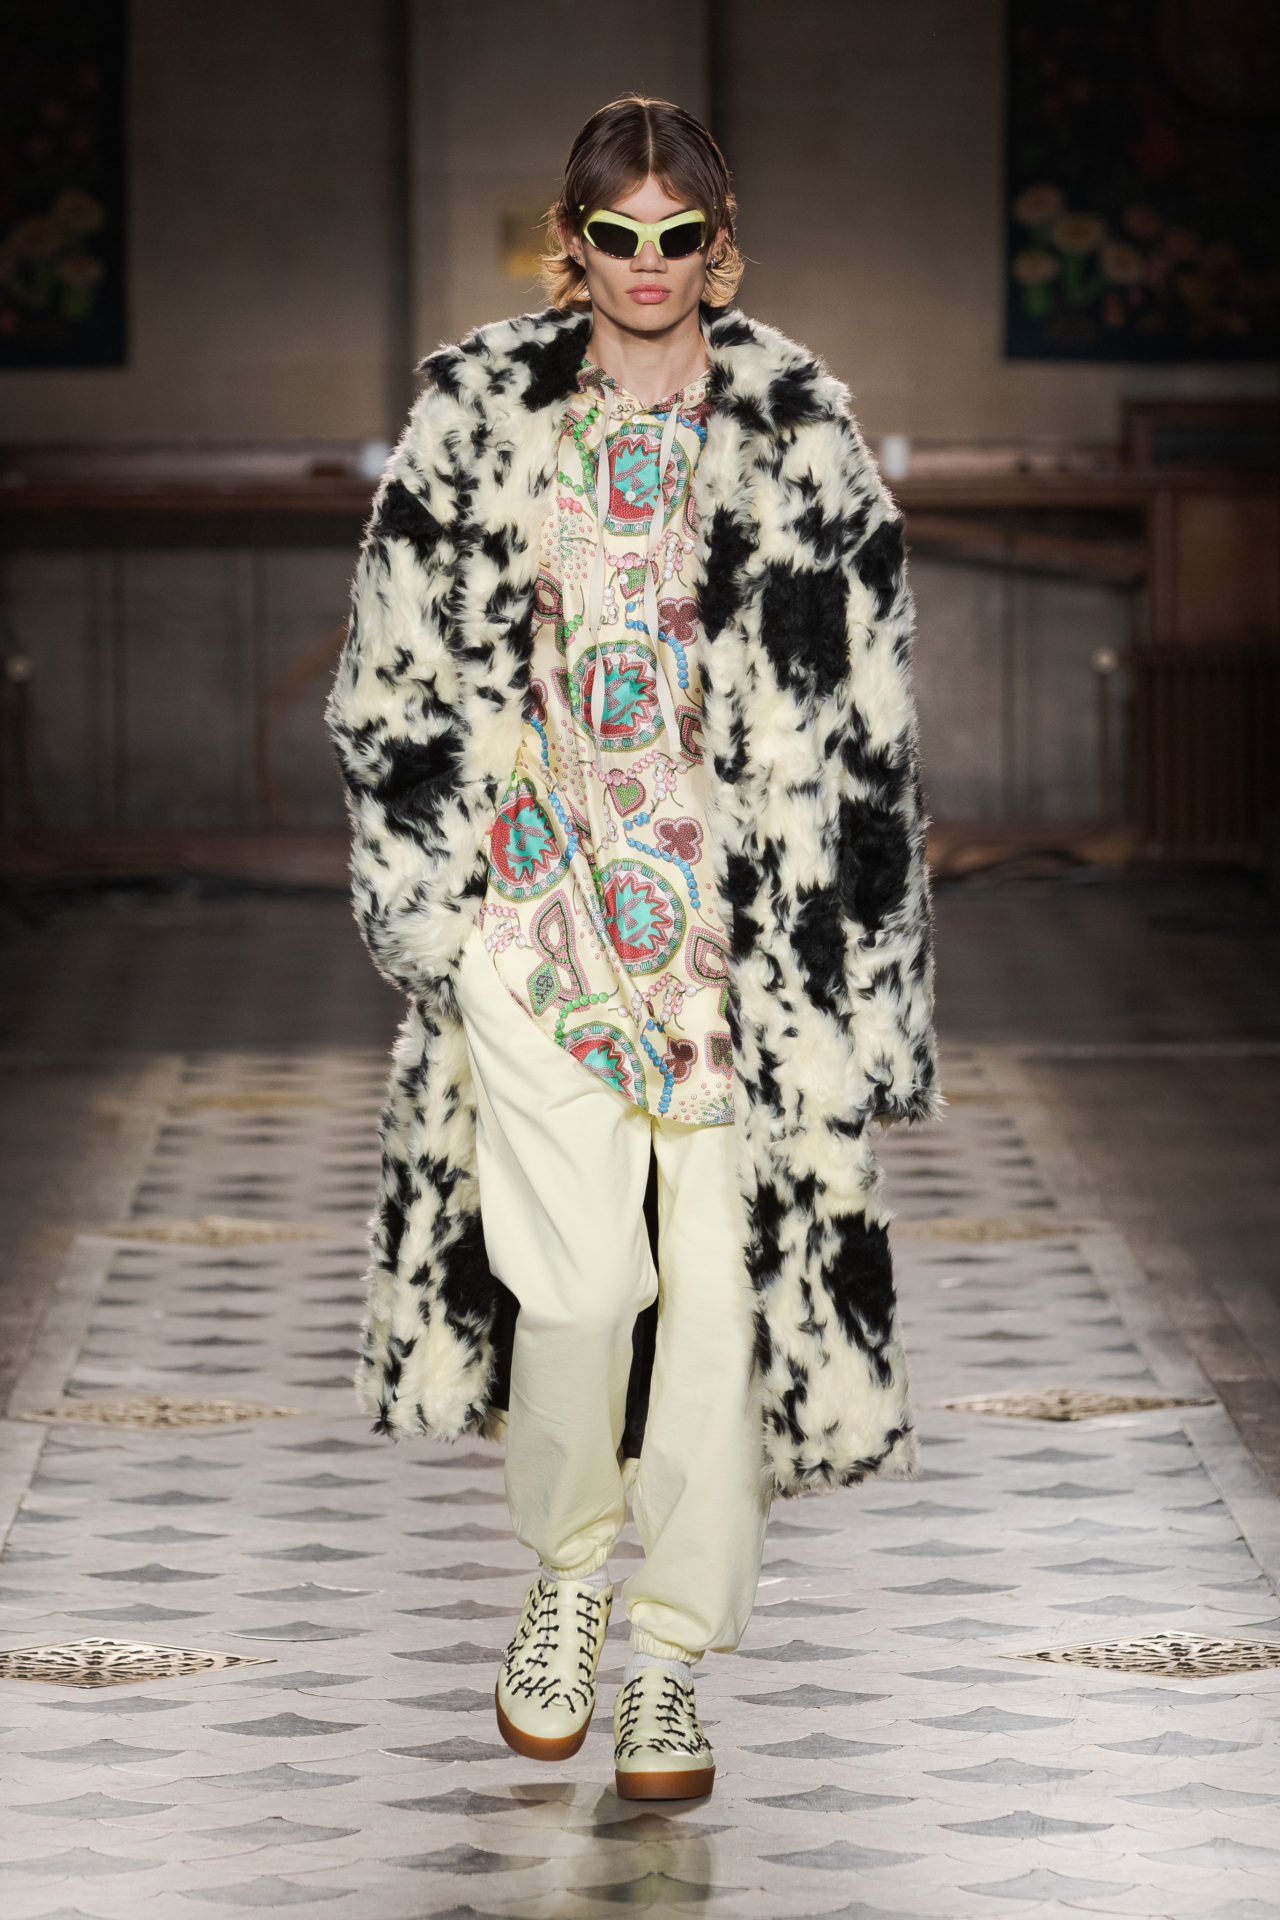 CAREFREE AND COLOURFUL AT BLUEMARBLE PFW F/W 23/24 BY LETICIA DARE